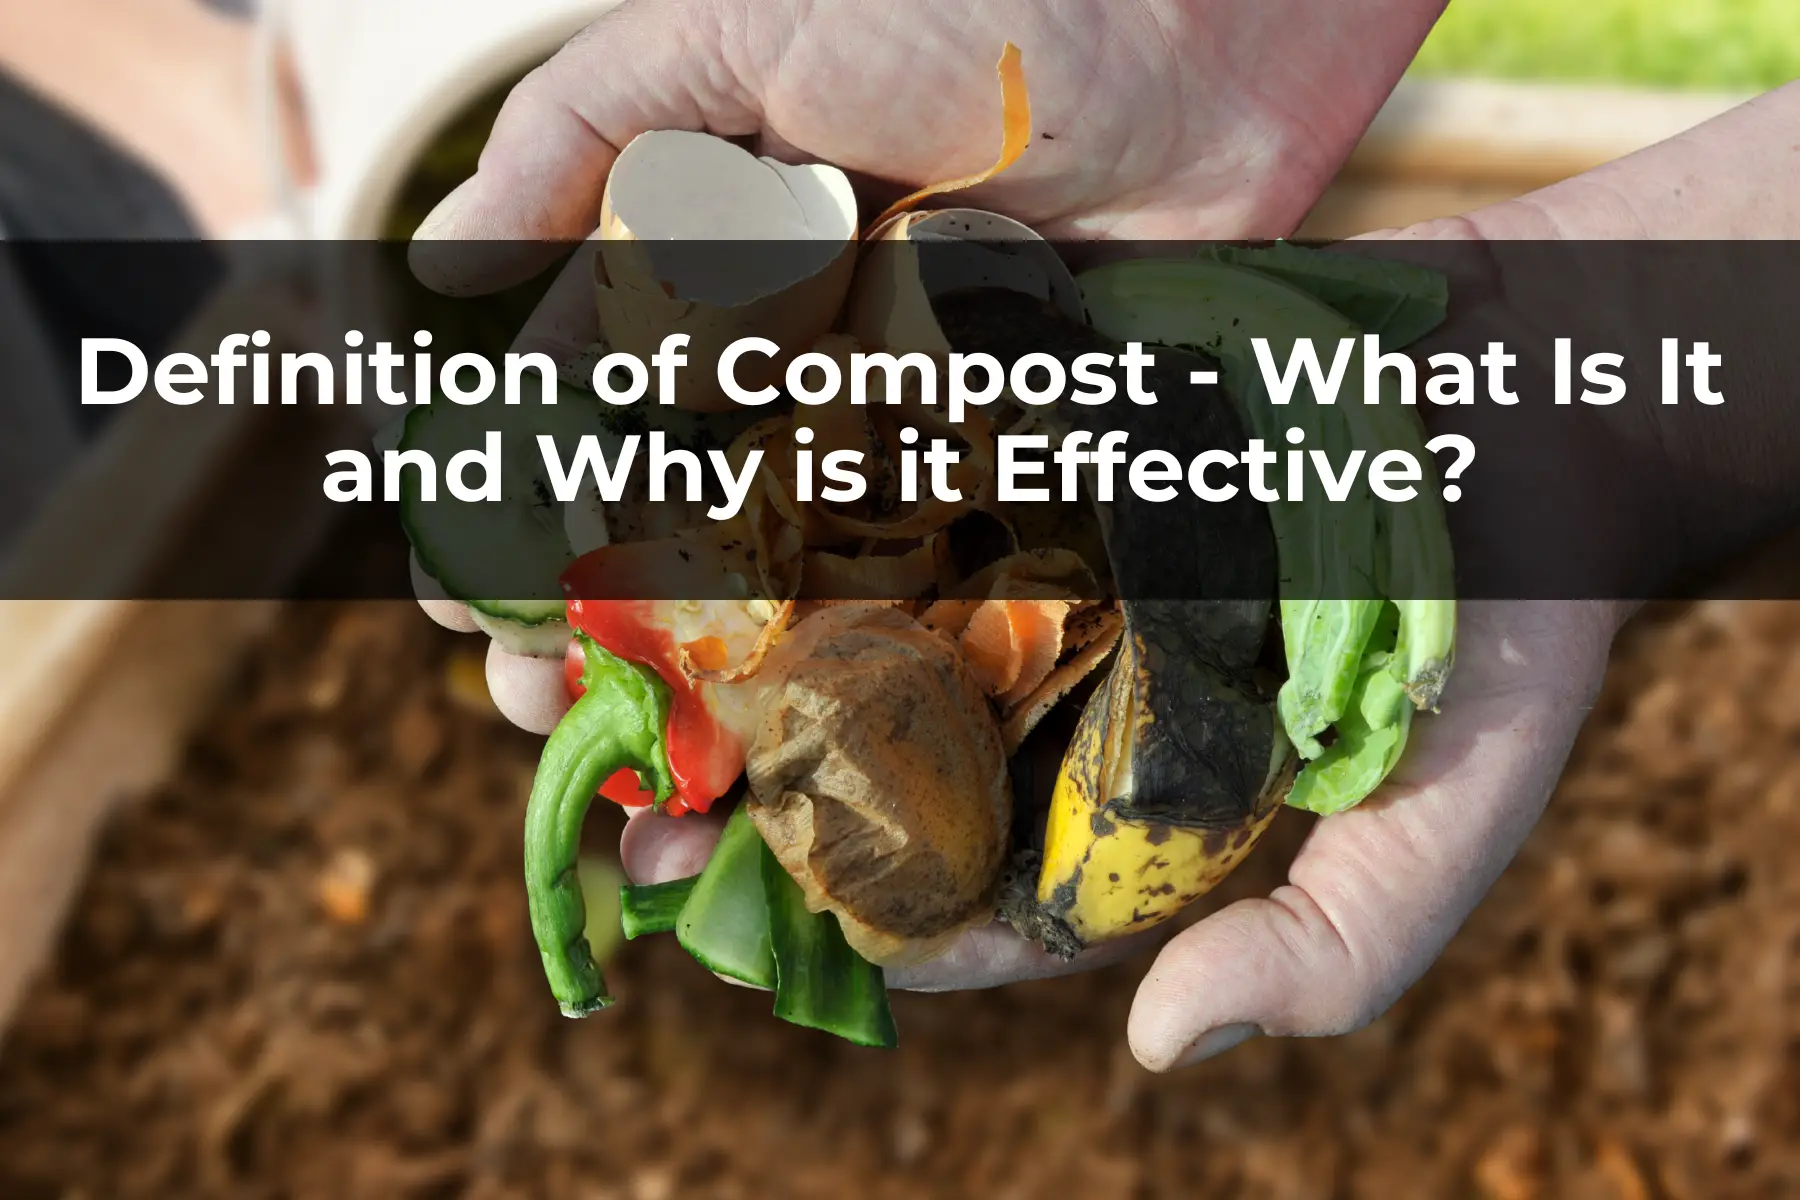 Definition of Compost - What Is It and Why is it Effective?